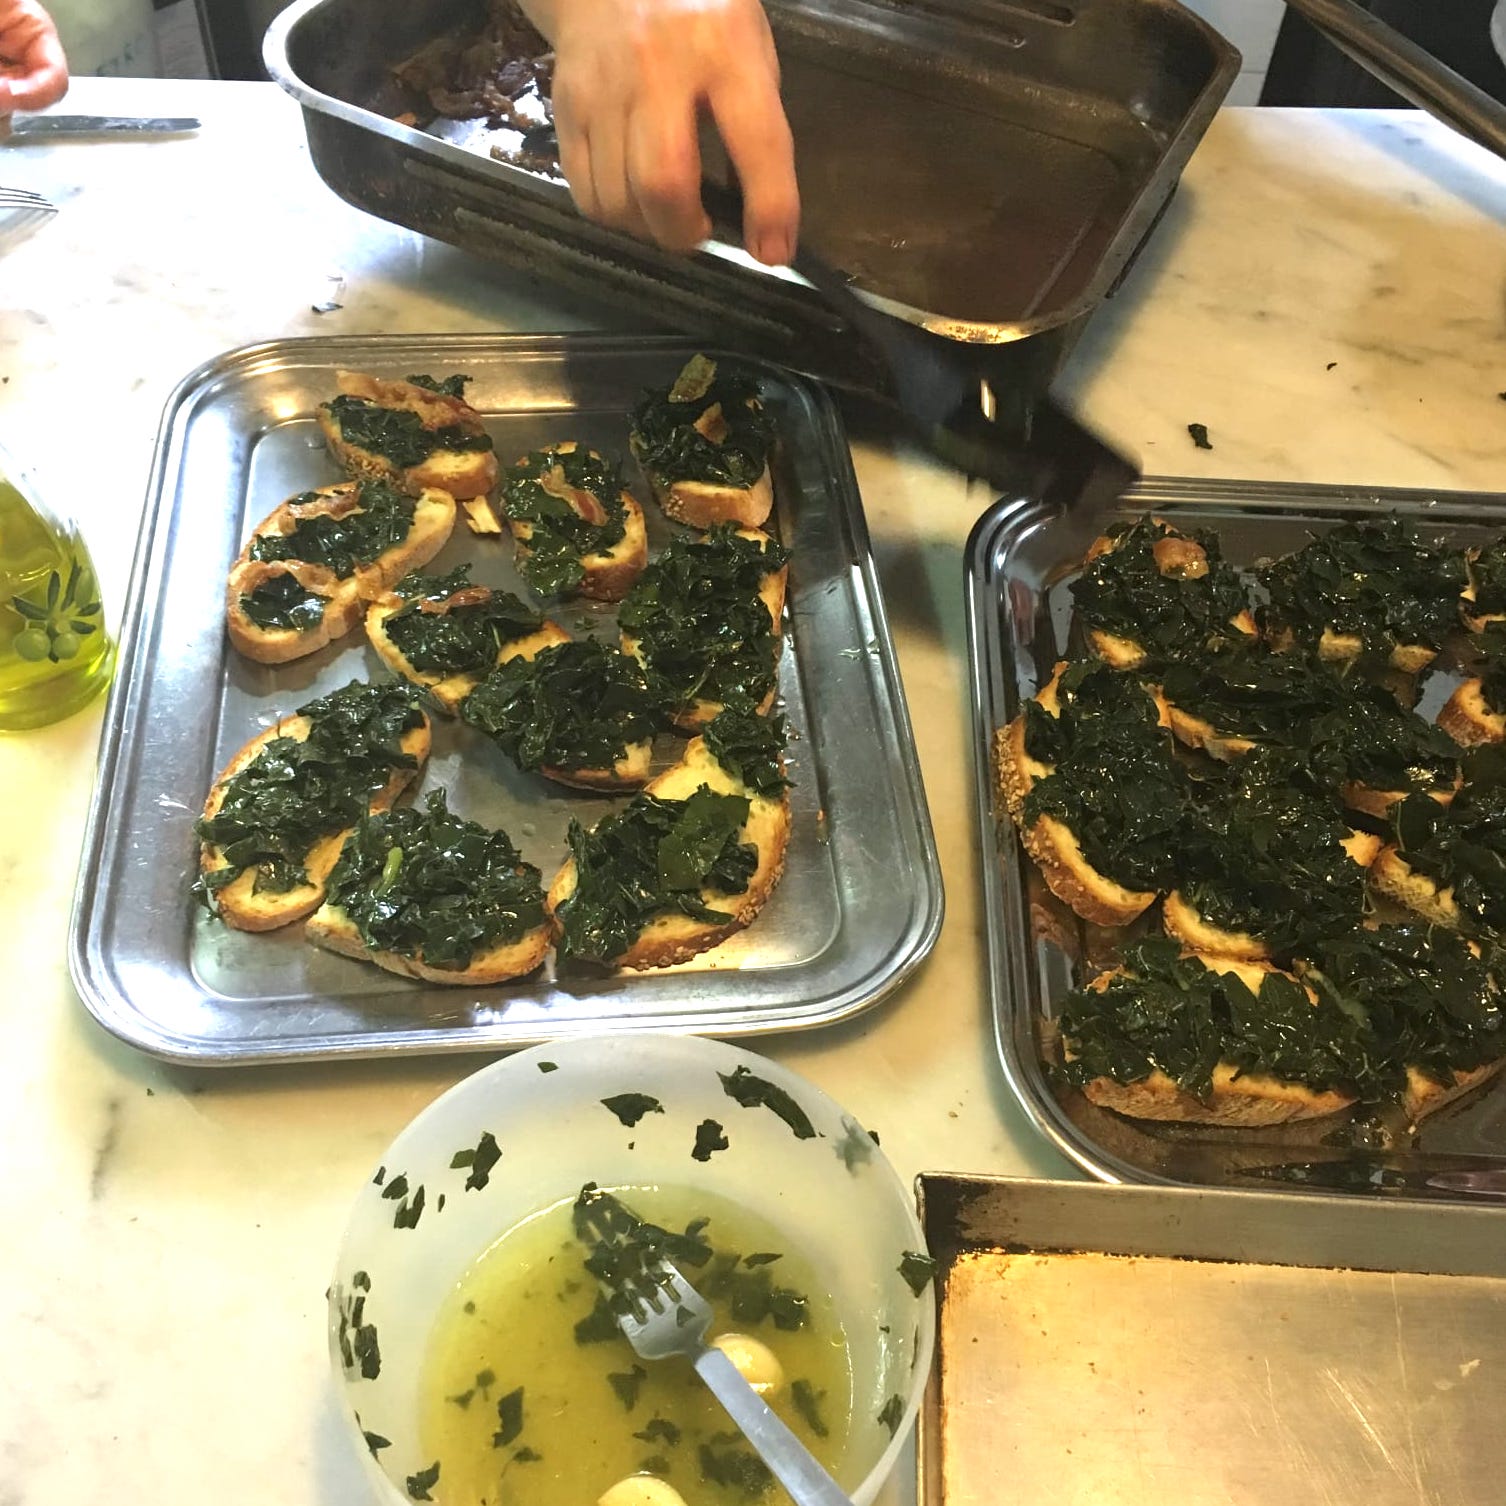 Topping thick slices of toasted bread with cooked kale.